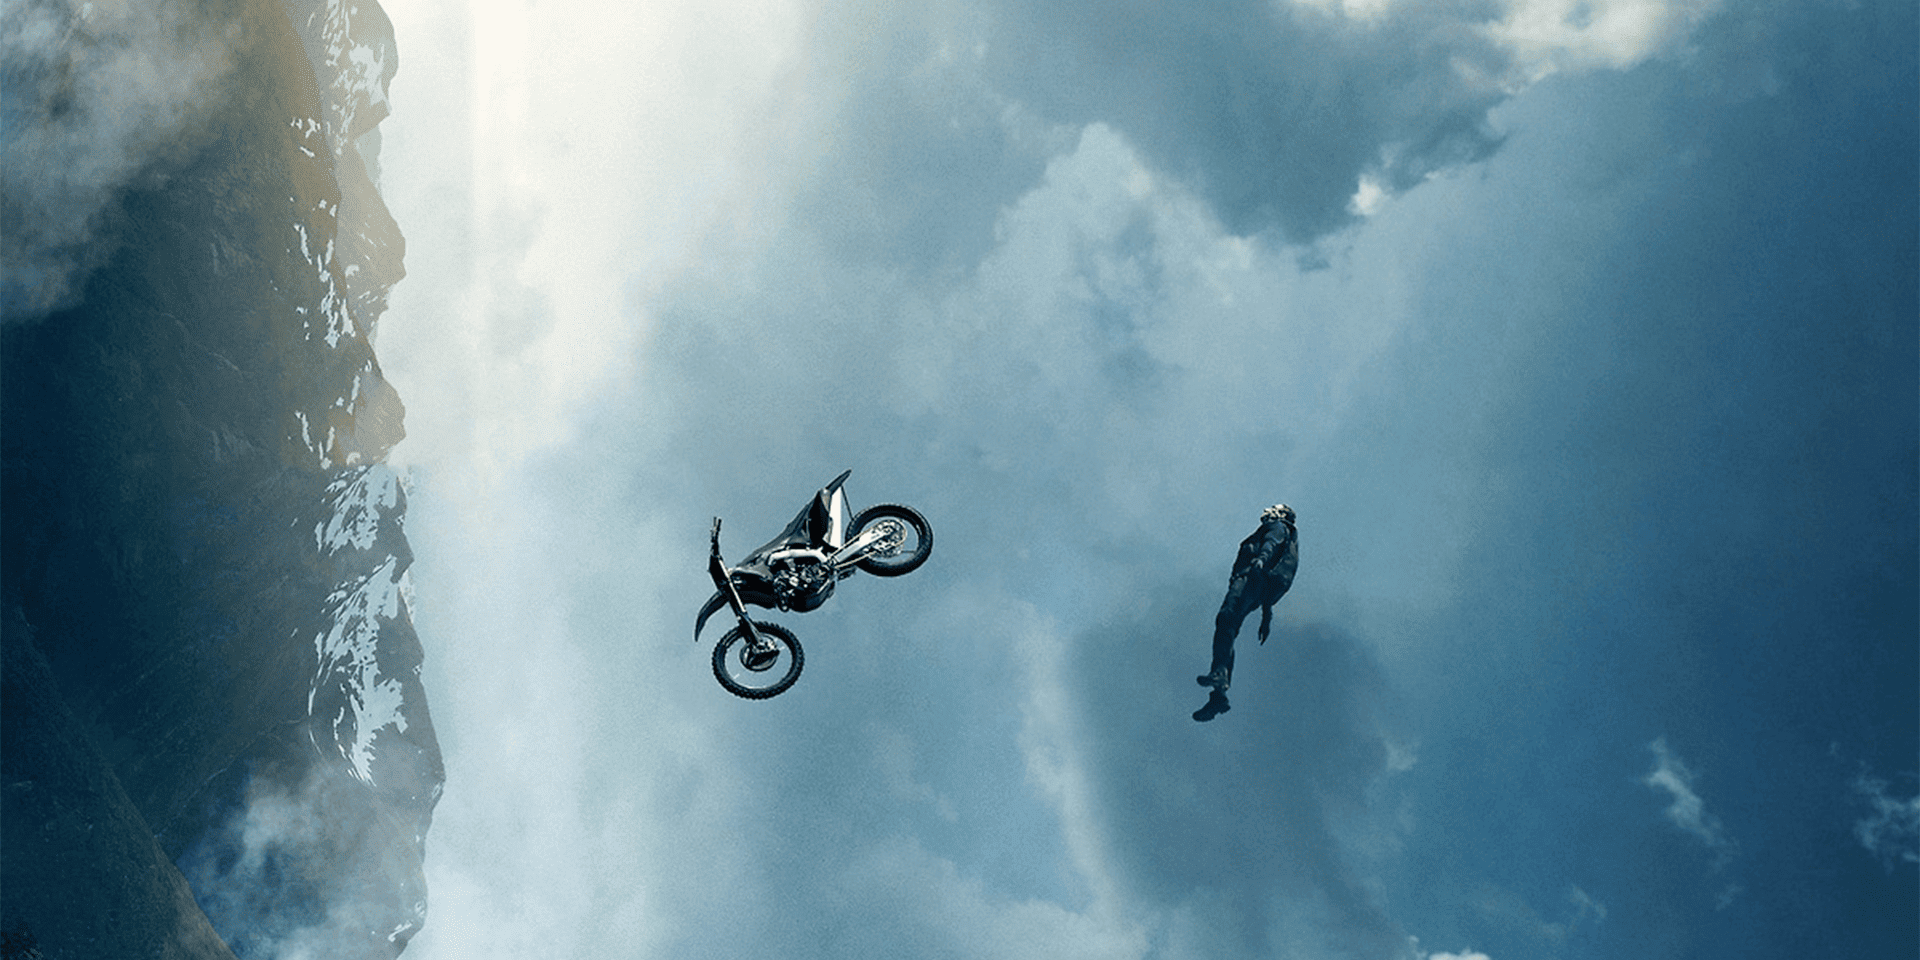 7 Jaw-Dropping ‘Mission Impossible’ Stunts That Prove Tom Cruise Is a Certified Badass